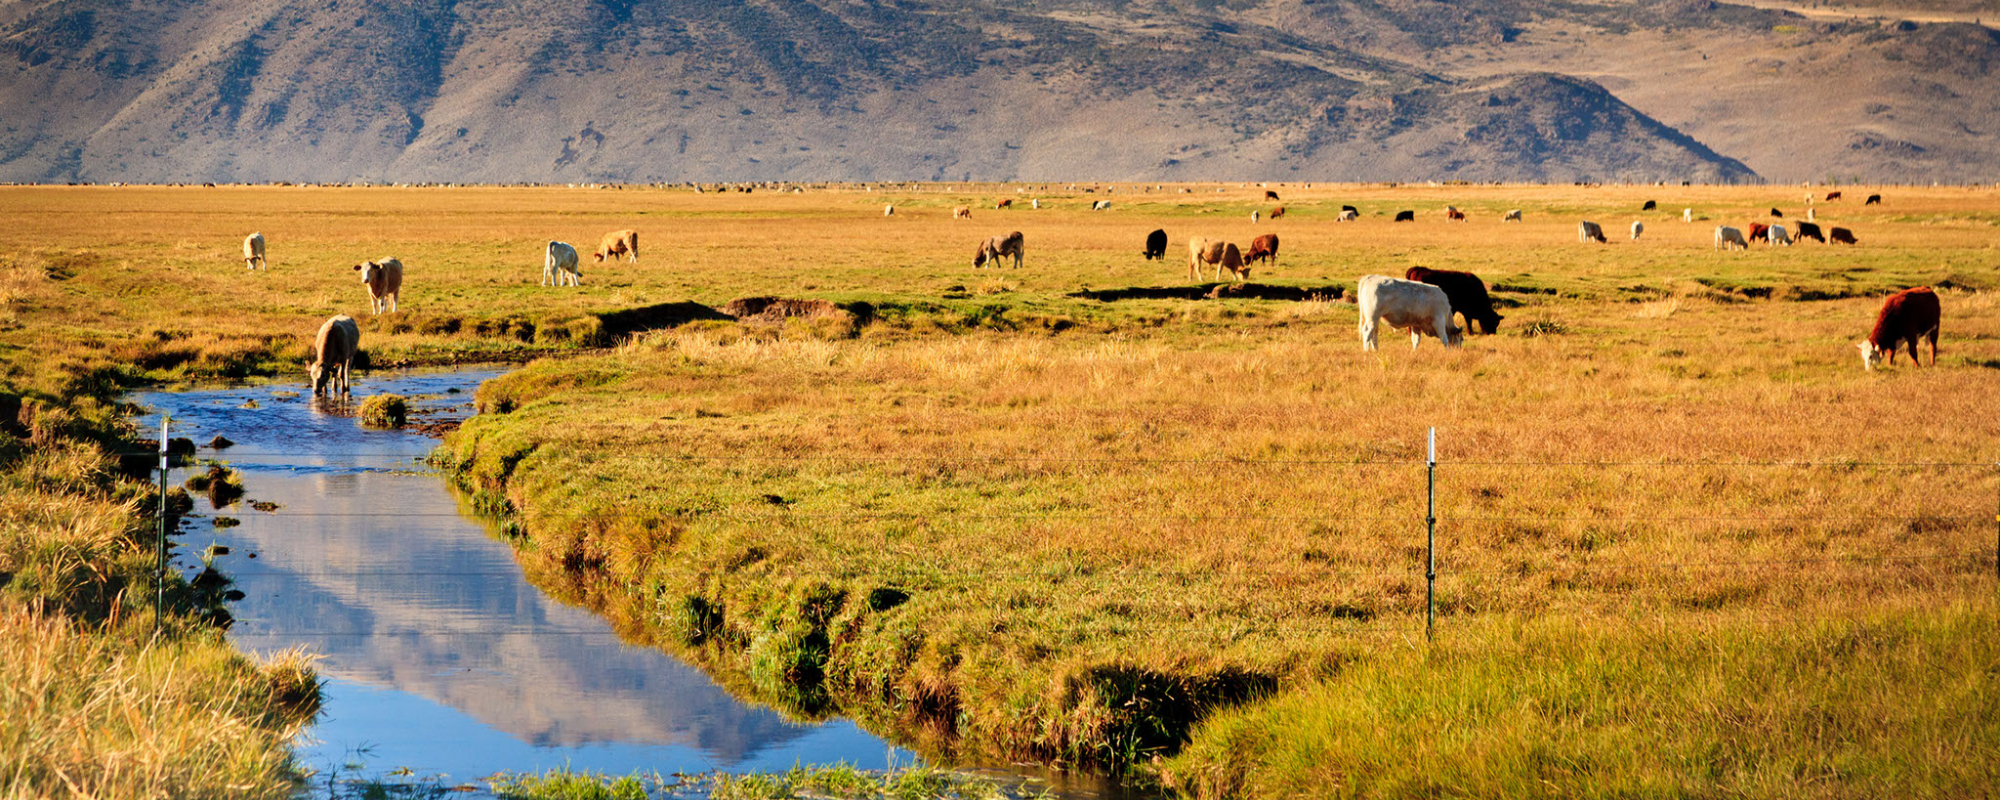 California Water: A Rancher's Perspective